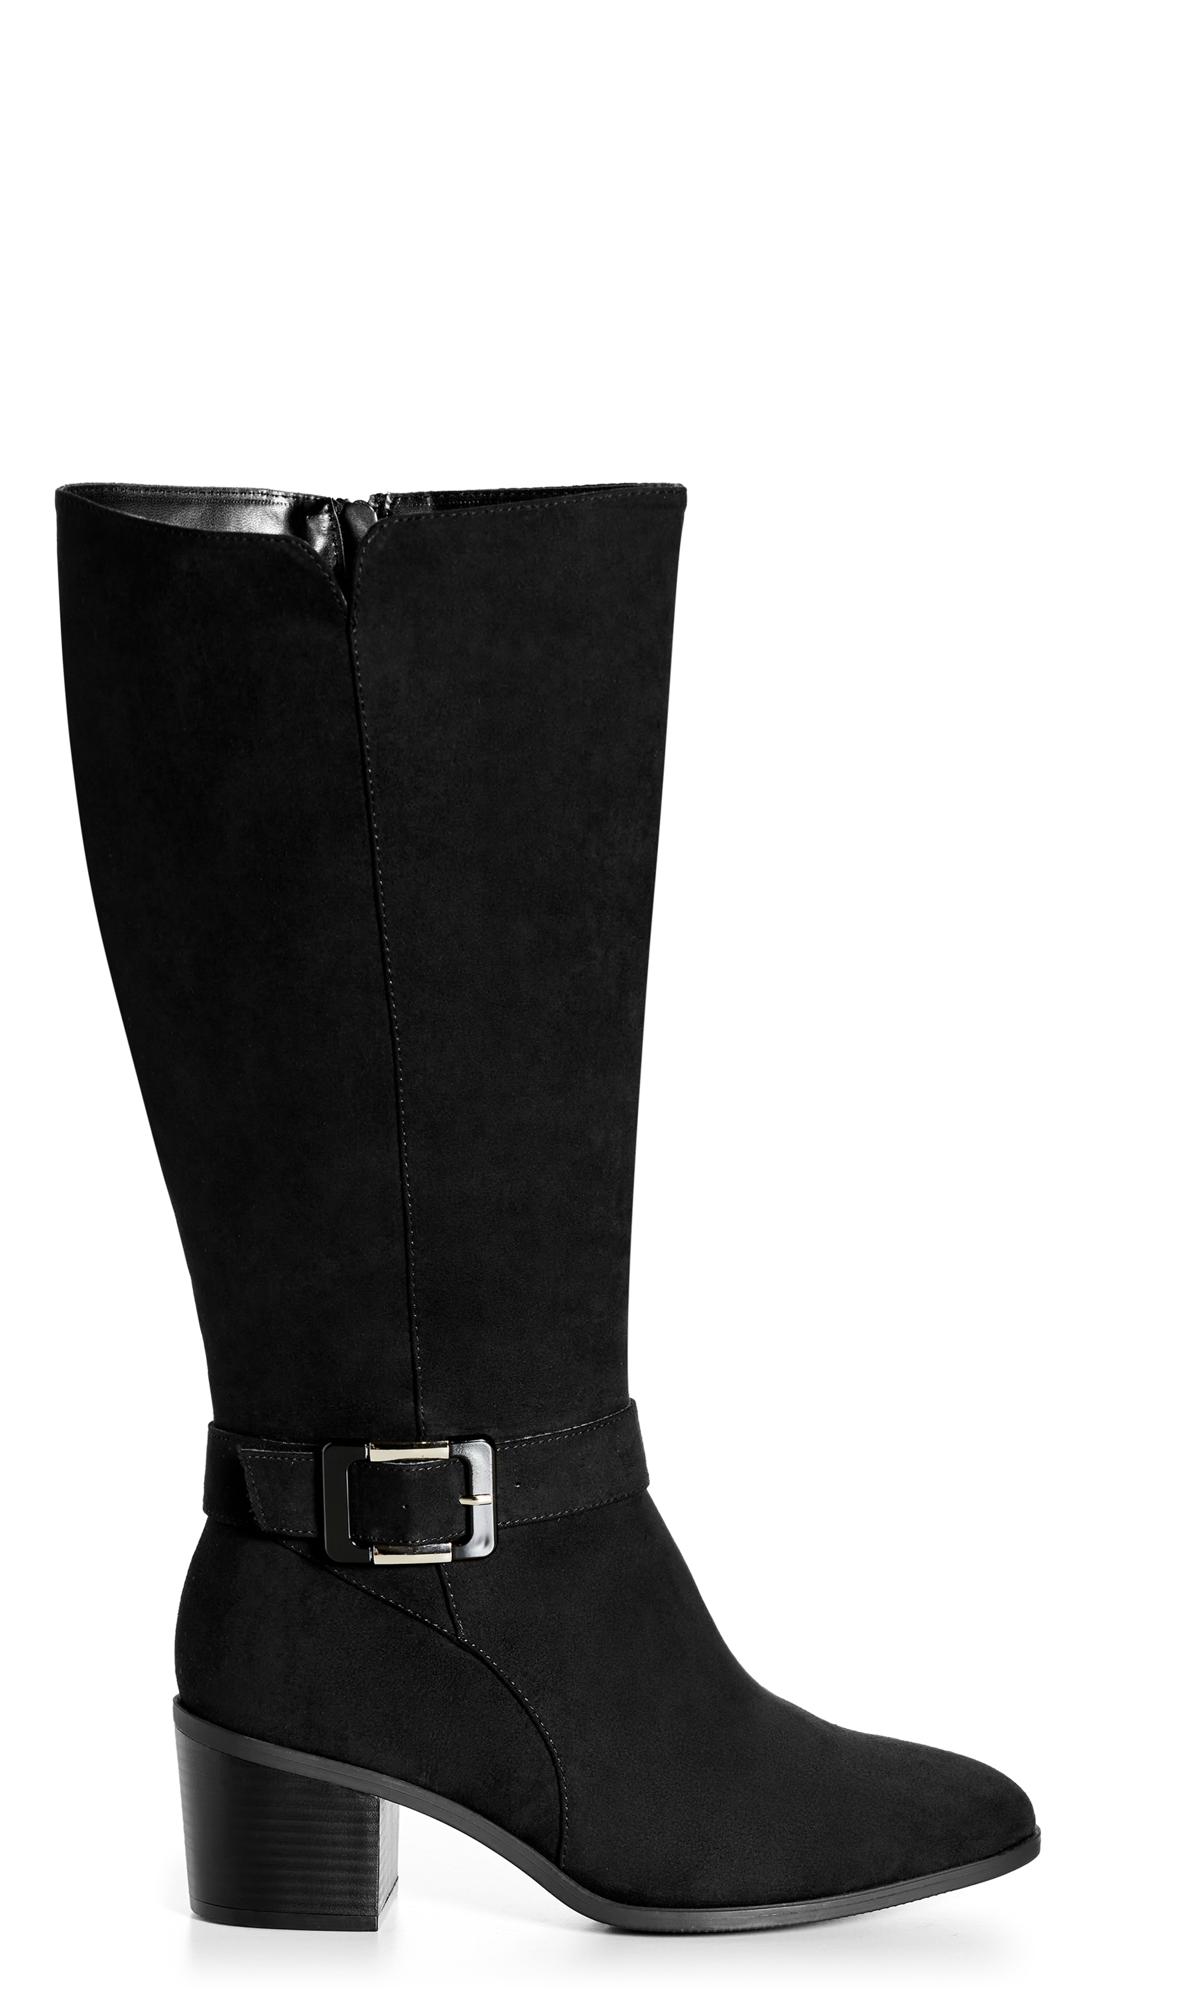 Evans Black Faux Suede Buckle Heeled Knee High Boots 2